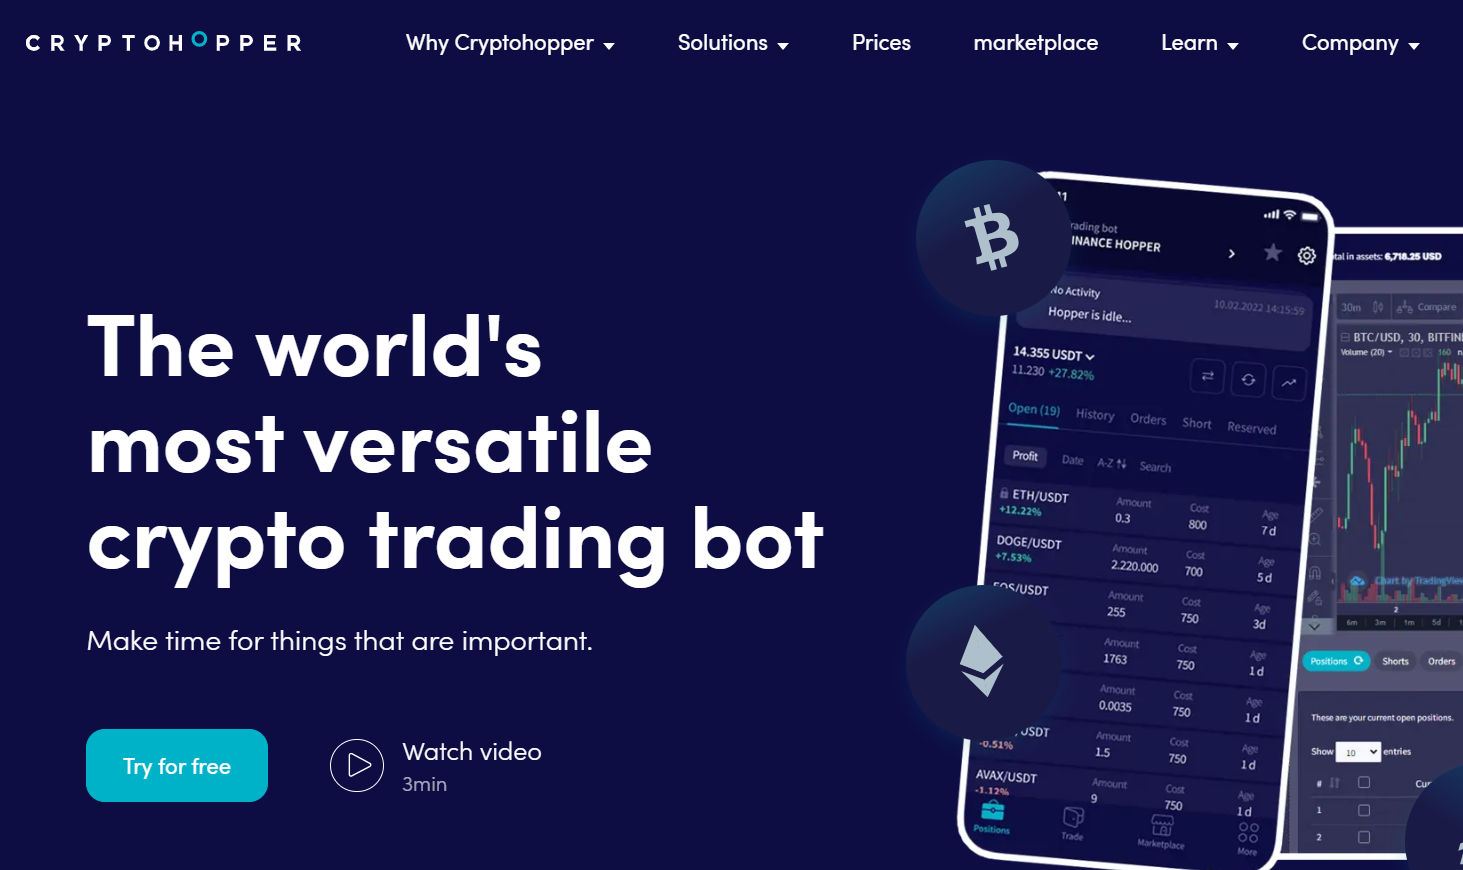 Cryptohopper bot: Home page of the crypto scalping bot